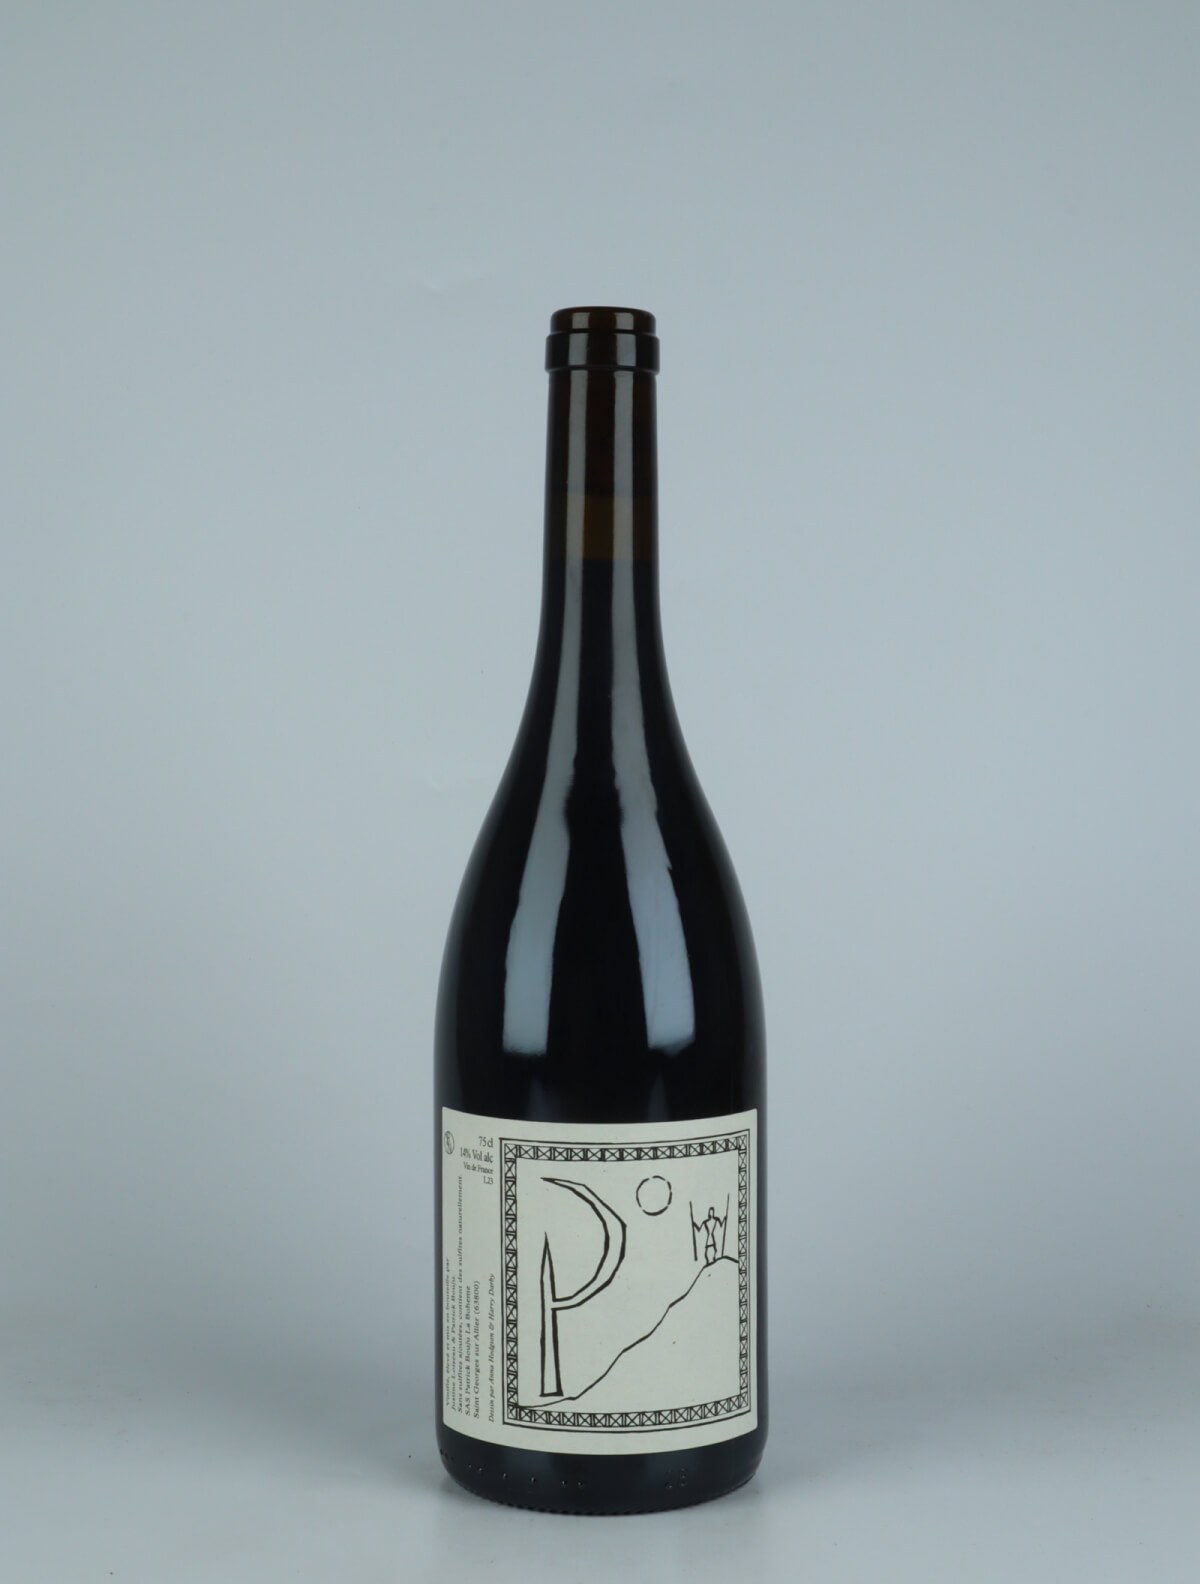 A bottle 2023 P Red wine from Patrick Bouju, Auvergne in France